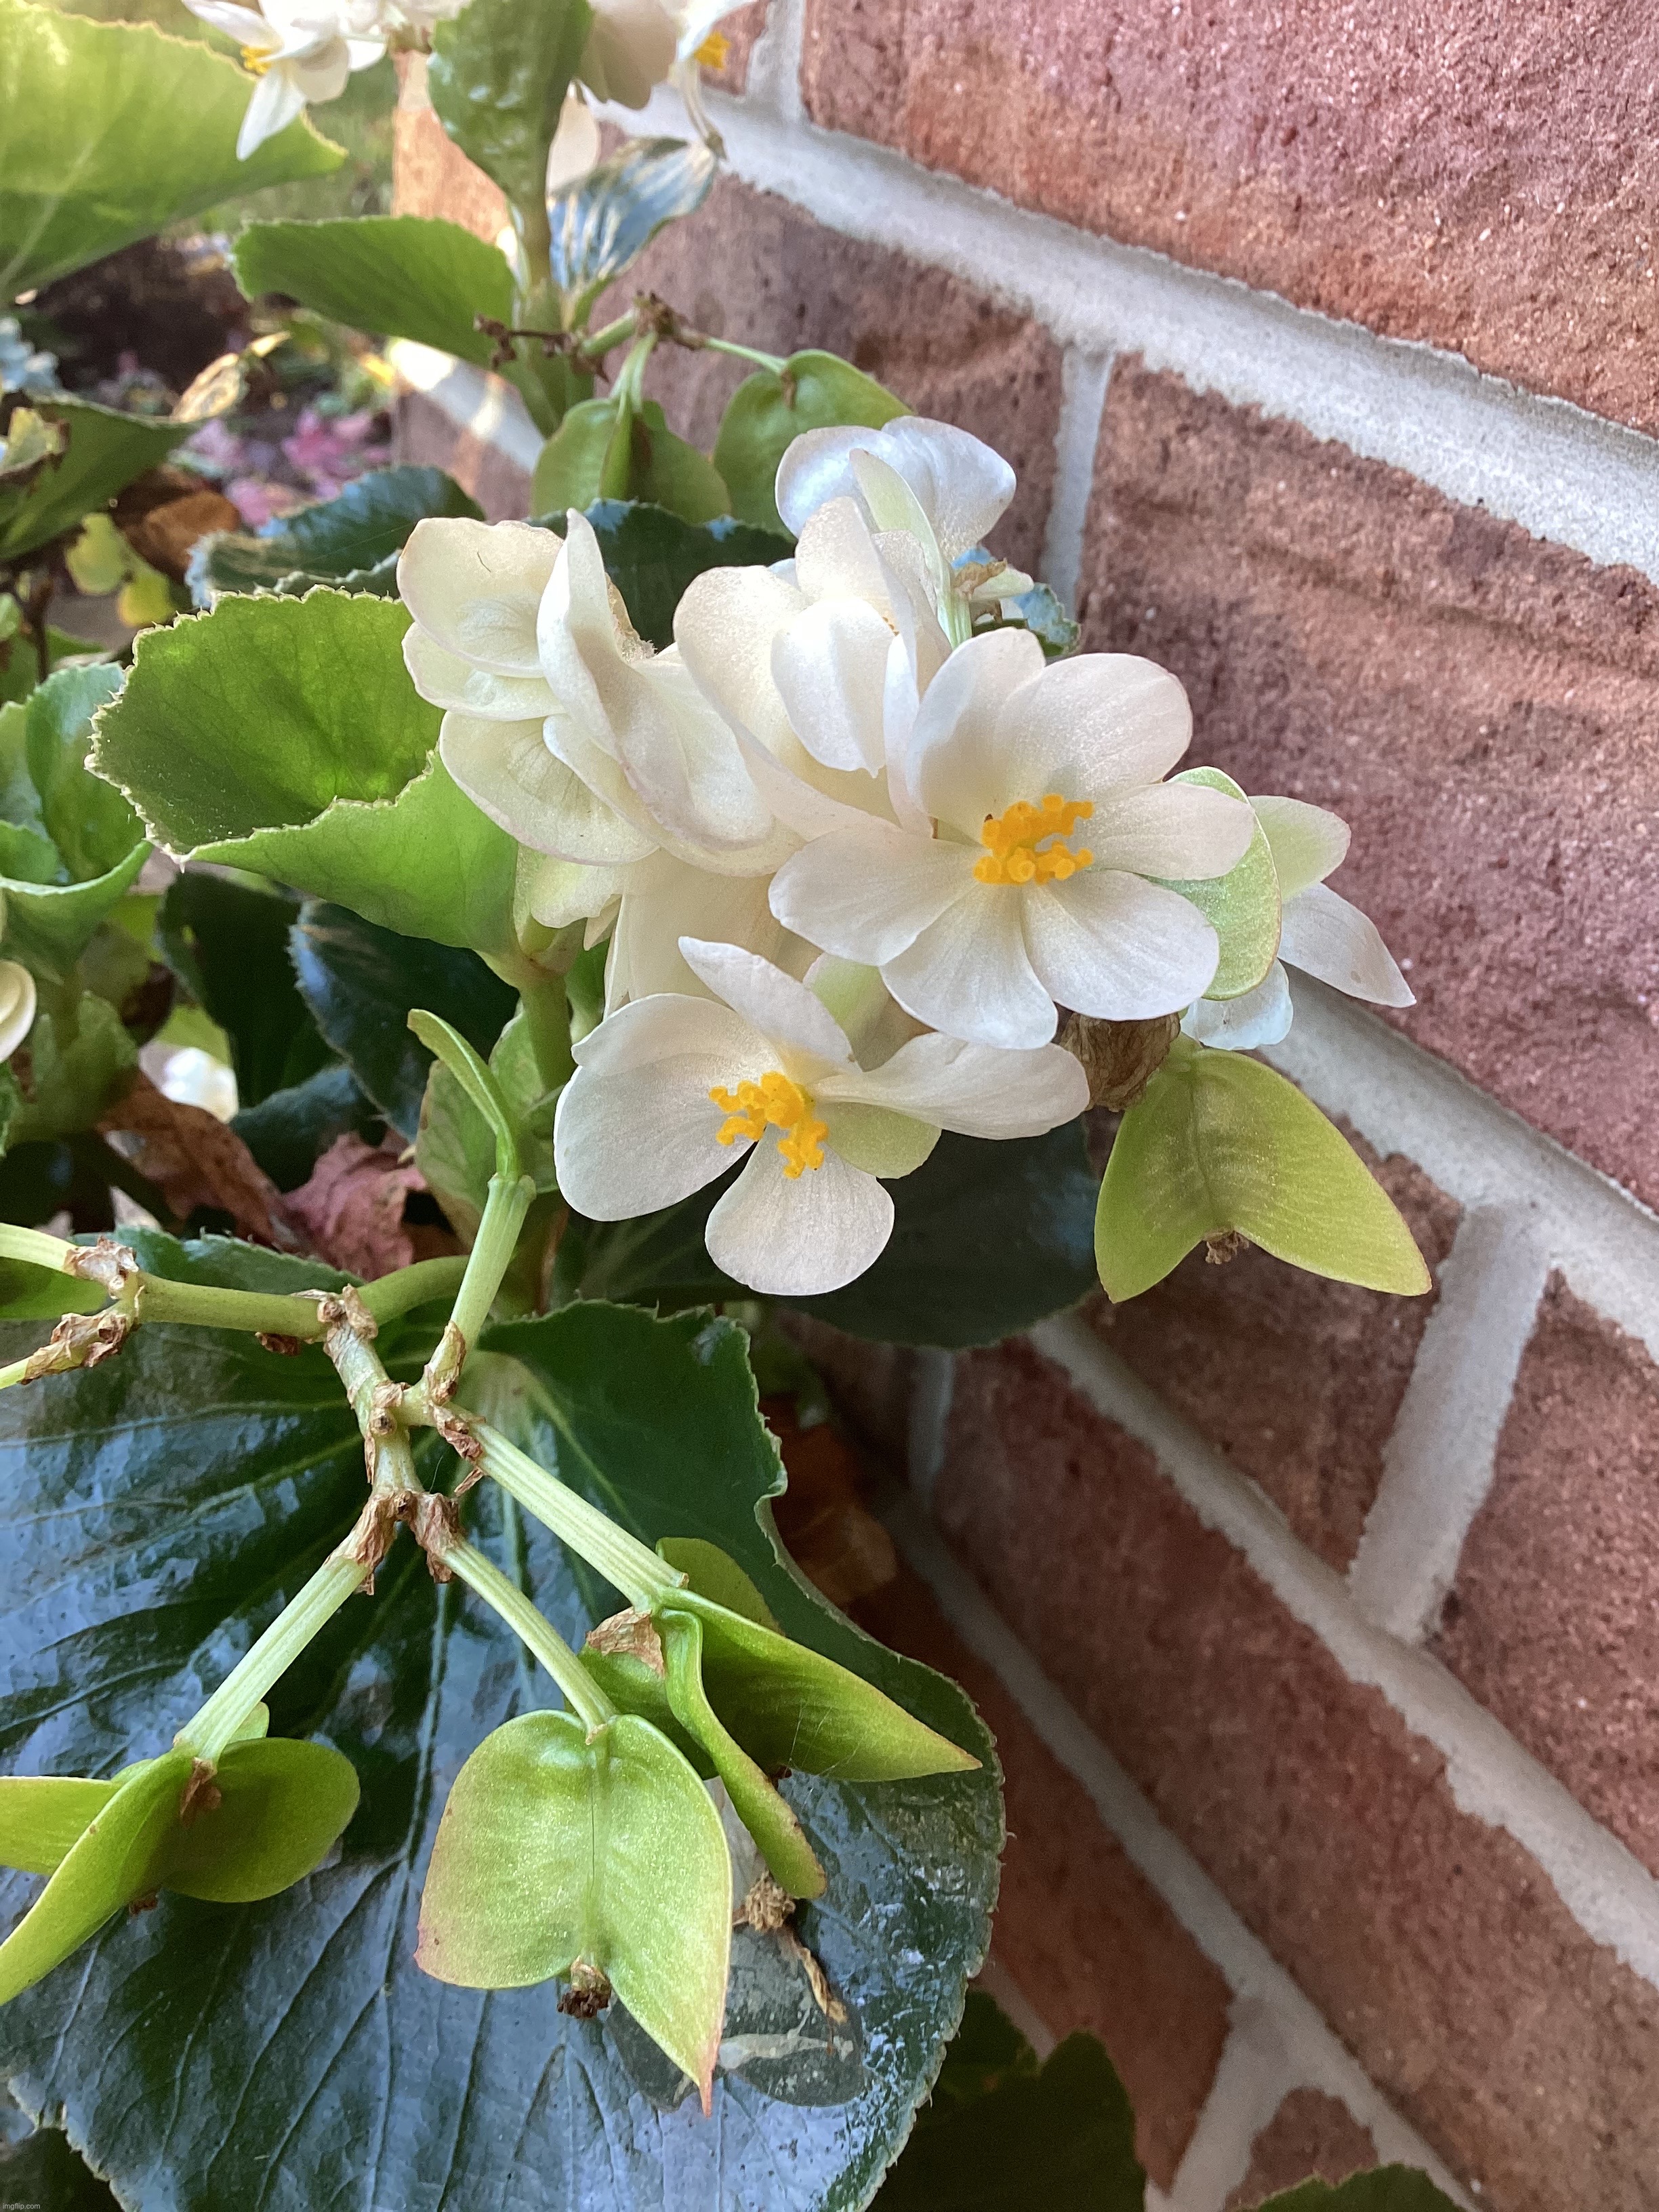 Some pretty white flowers I found | image tagged in share your own photos | made w/ Imgflip meme maker